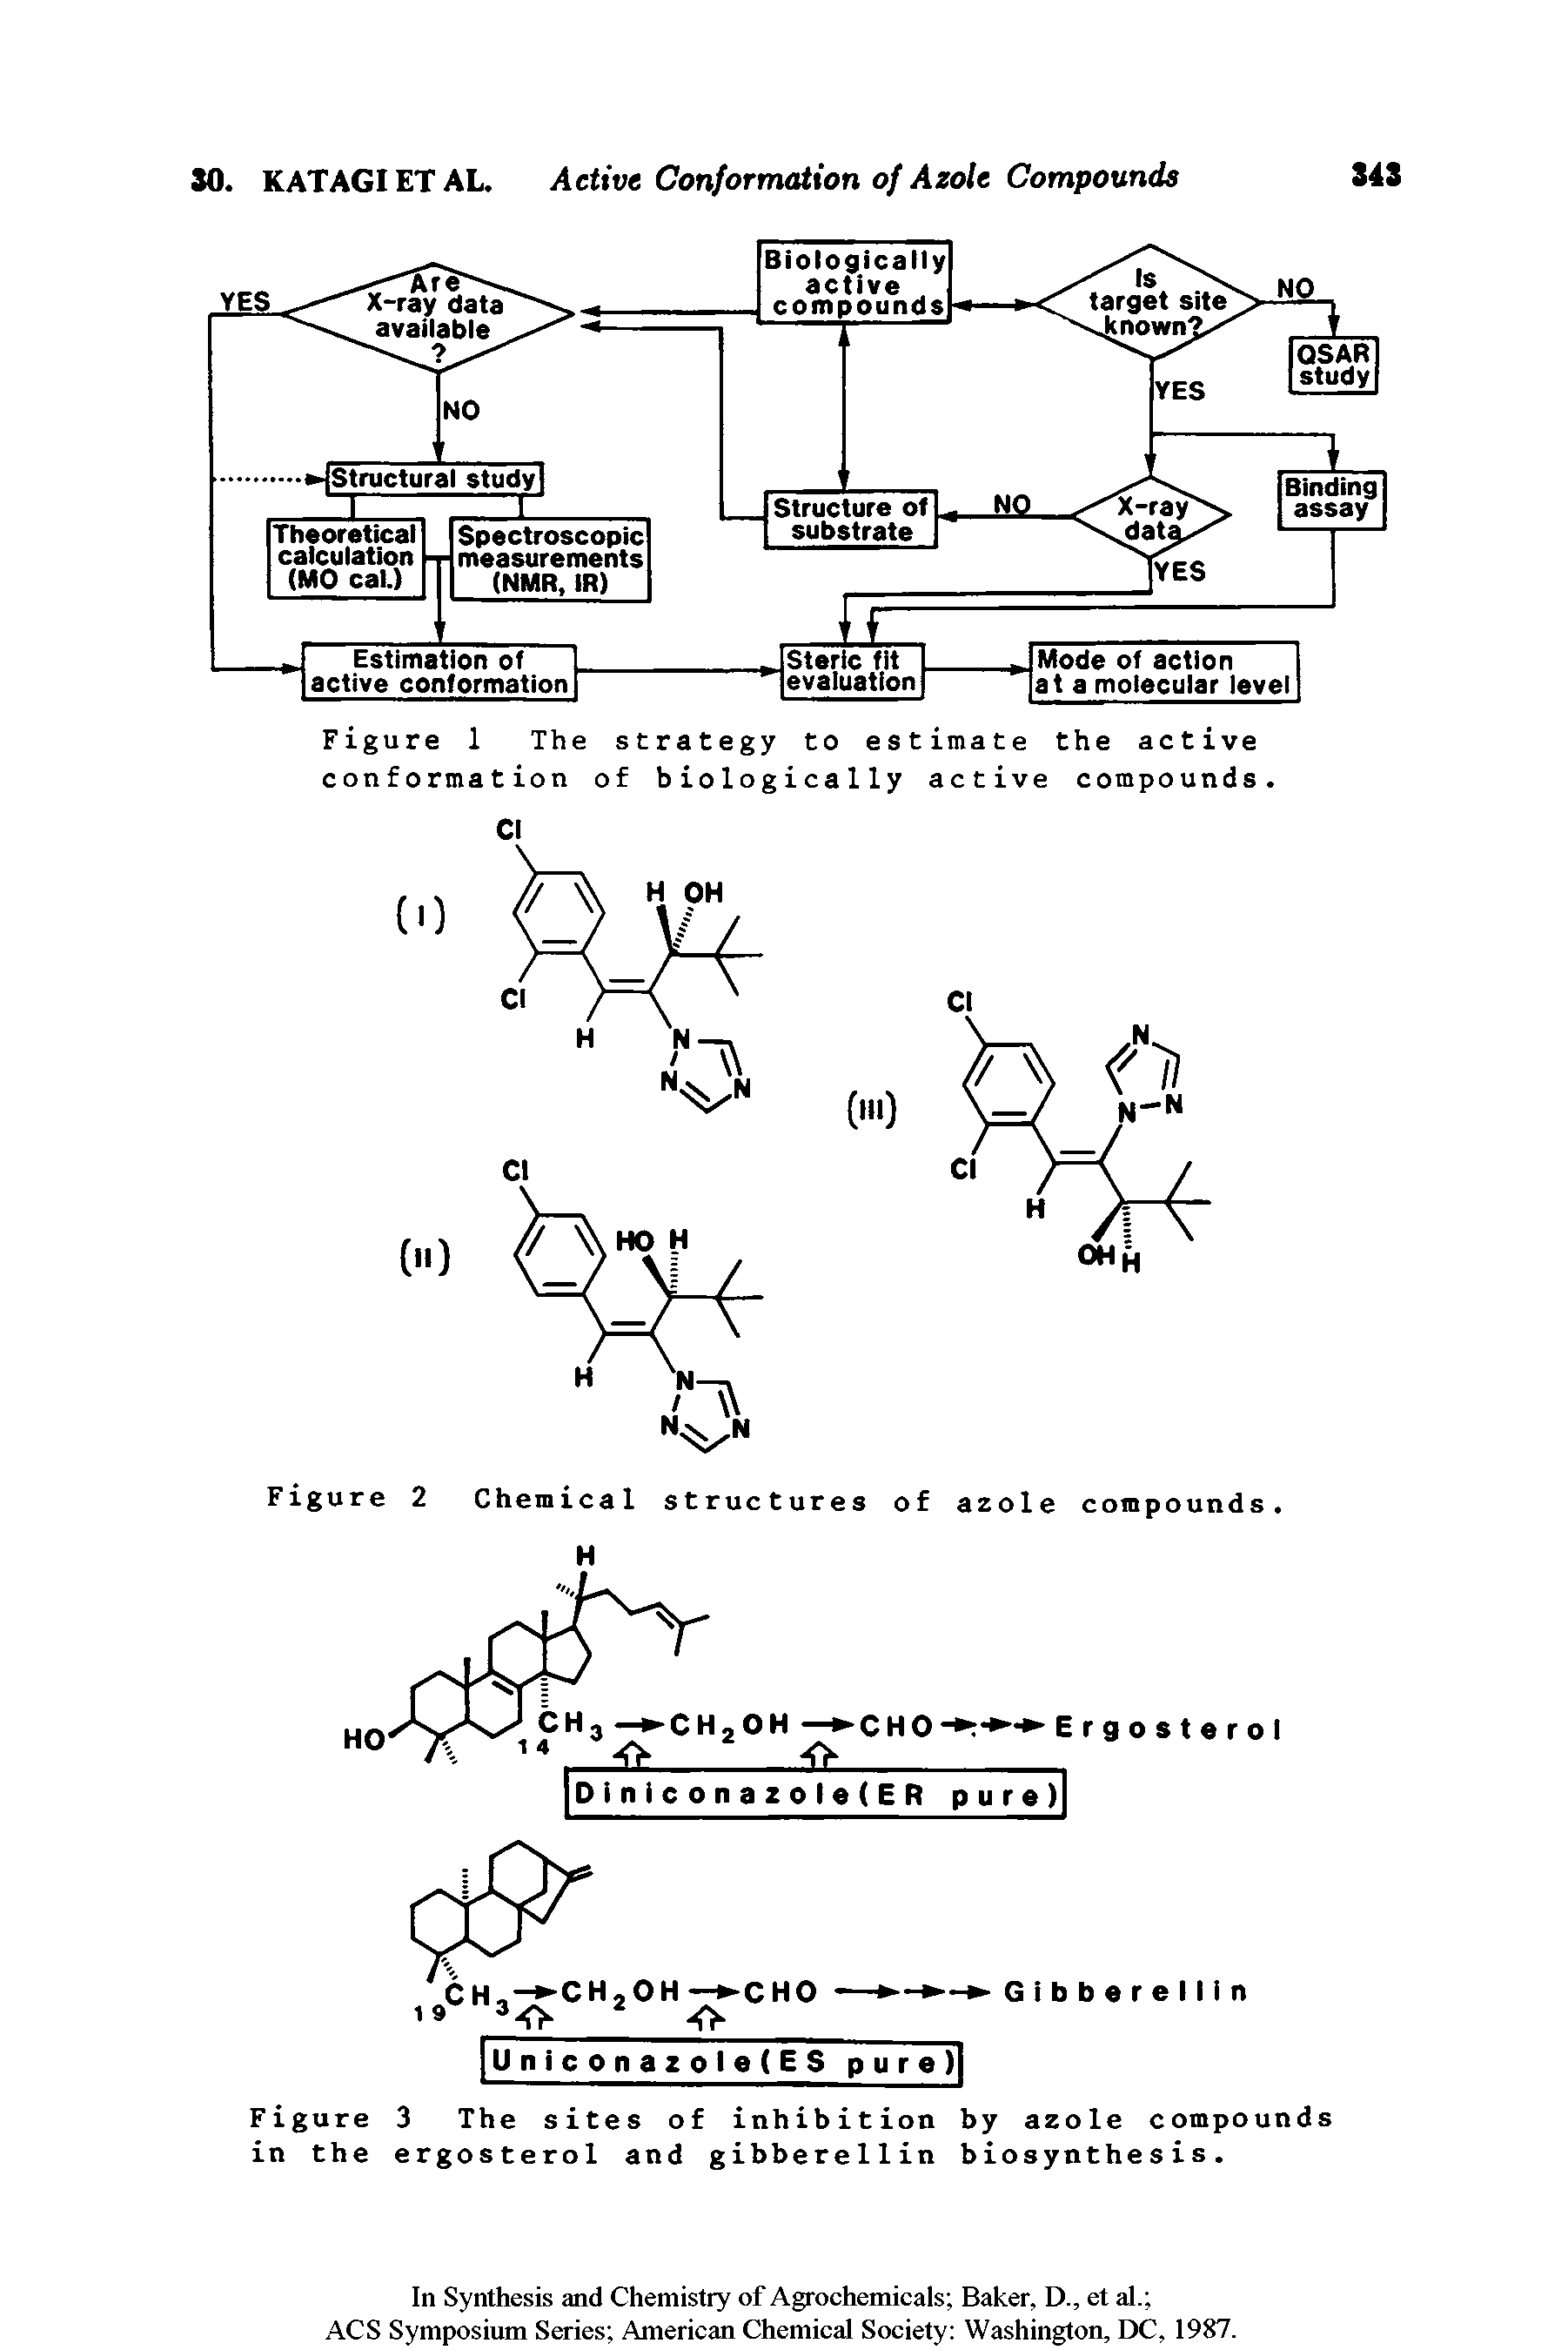 Figure 3 The sites of inhibition by azole compounds in the ergosterol and gibberellin biosynthesis.